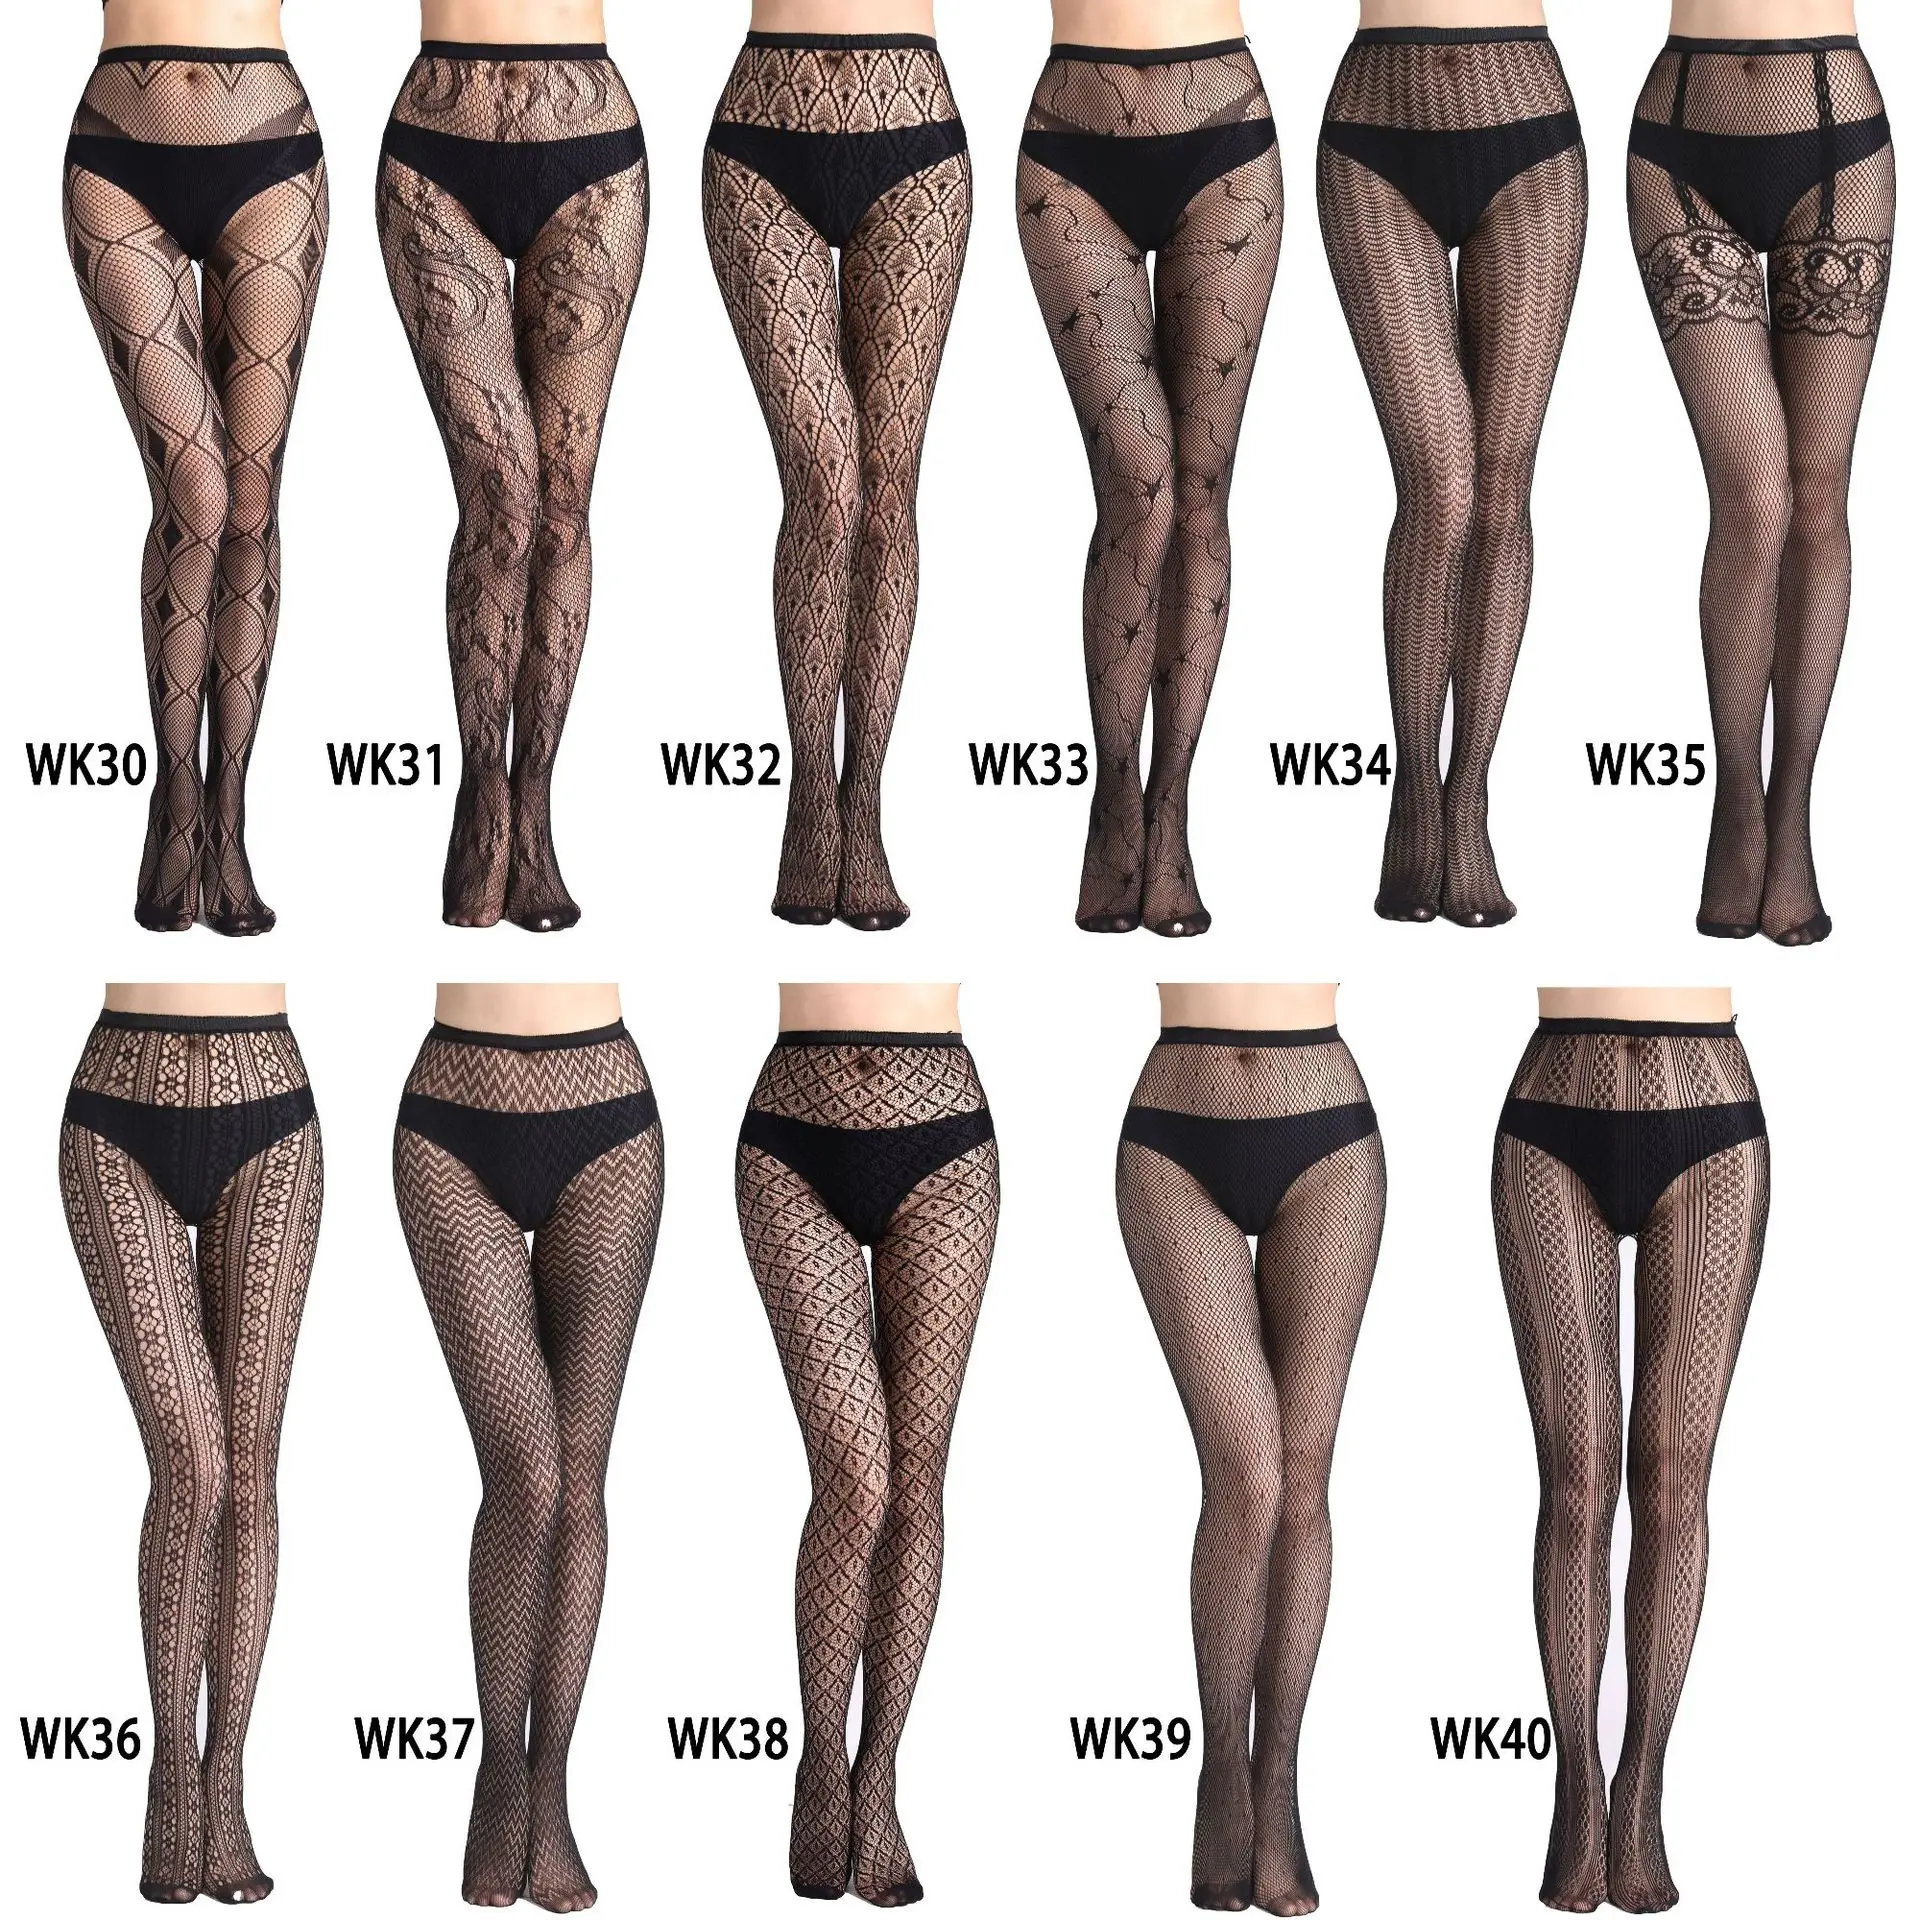 

Womens Sexy Fishnet Black Tights Jacquard Weave Pantyhose Yarns Garter Grid Fish Net Stockings Hose Sexy Panty Collant Lingerie